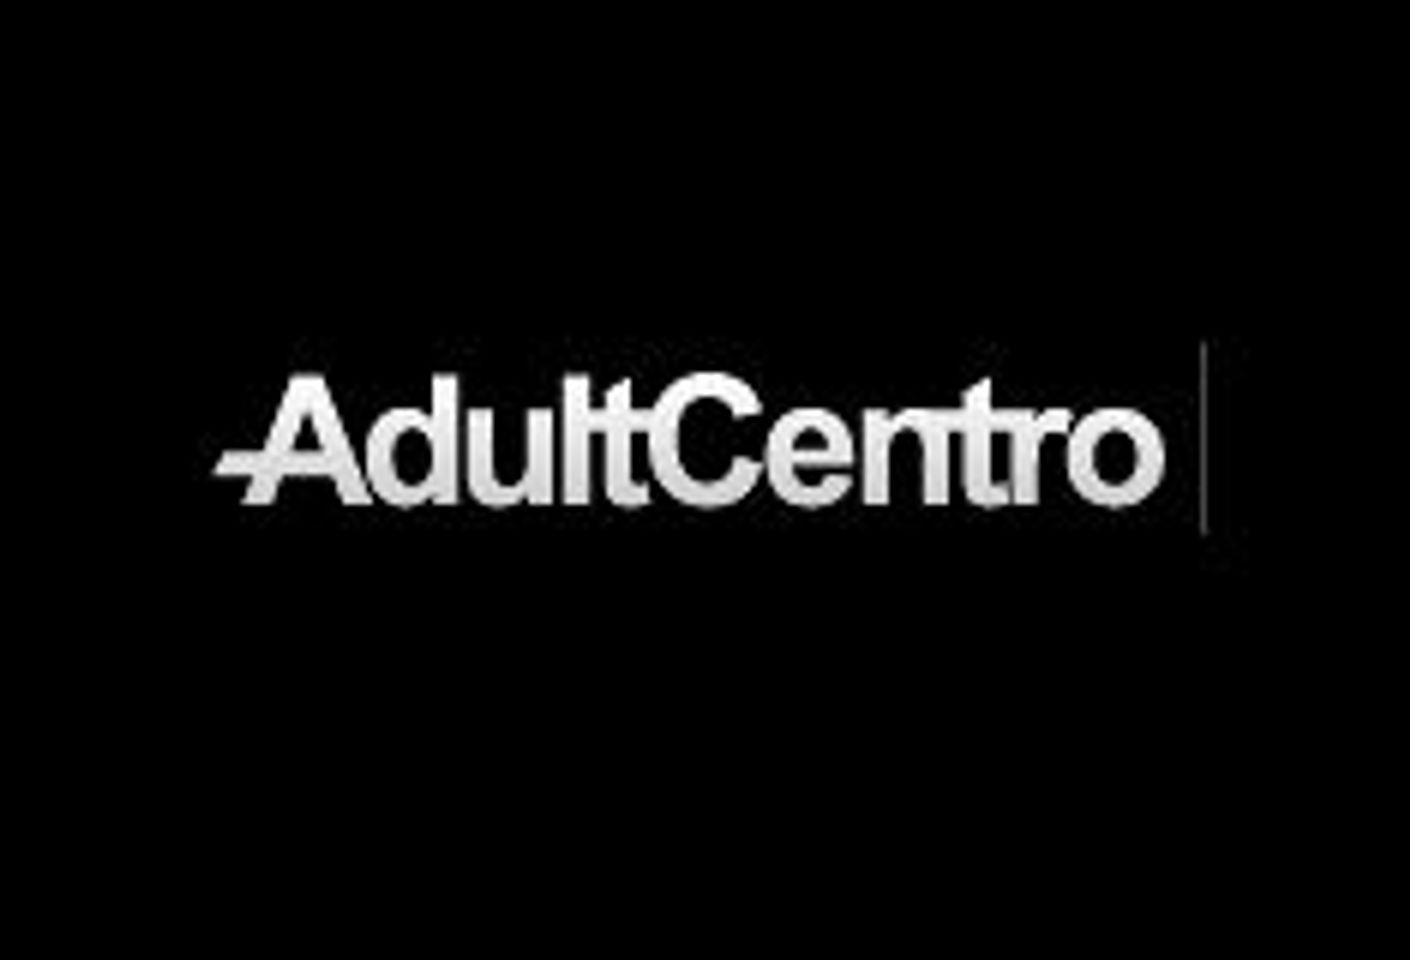 Club Jenna Content Added to AdultCentro Publisher